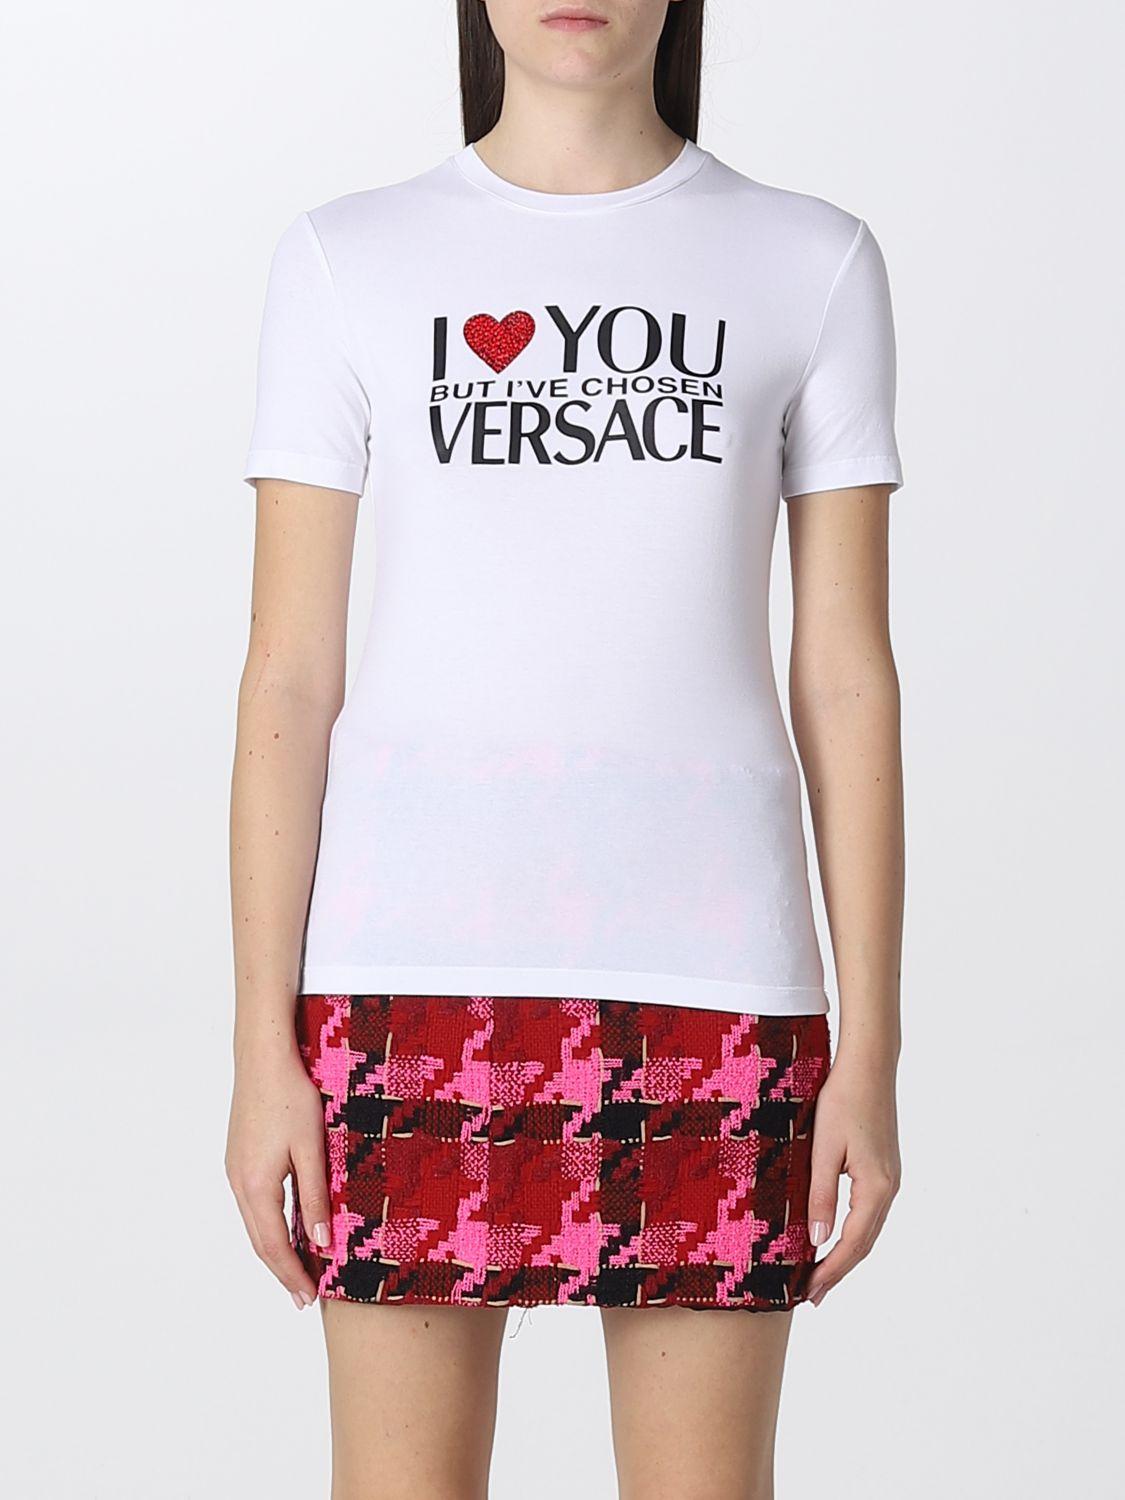 Versace T-shirt With I Love You But I've Chosen Print in White | Lyst